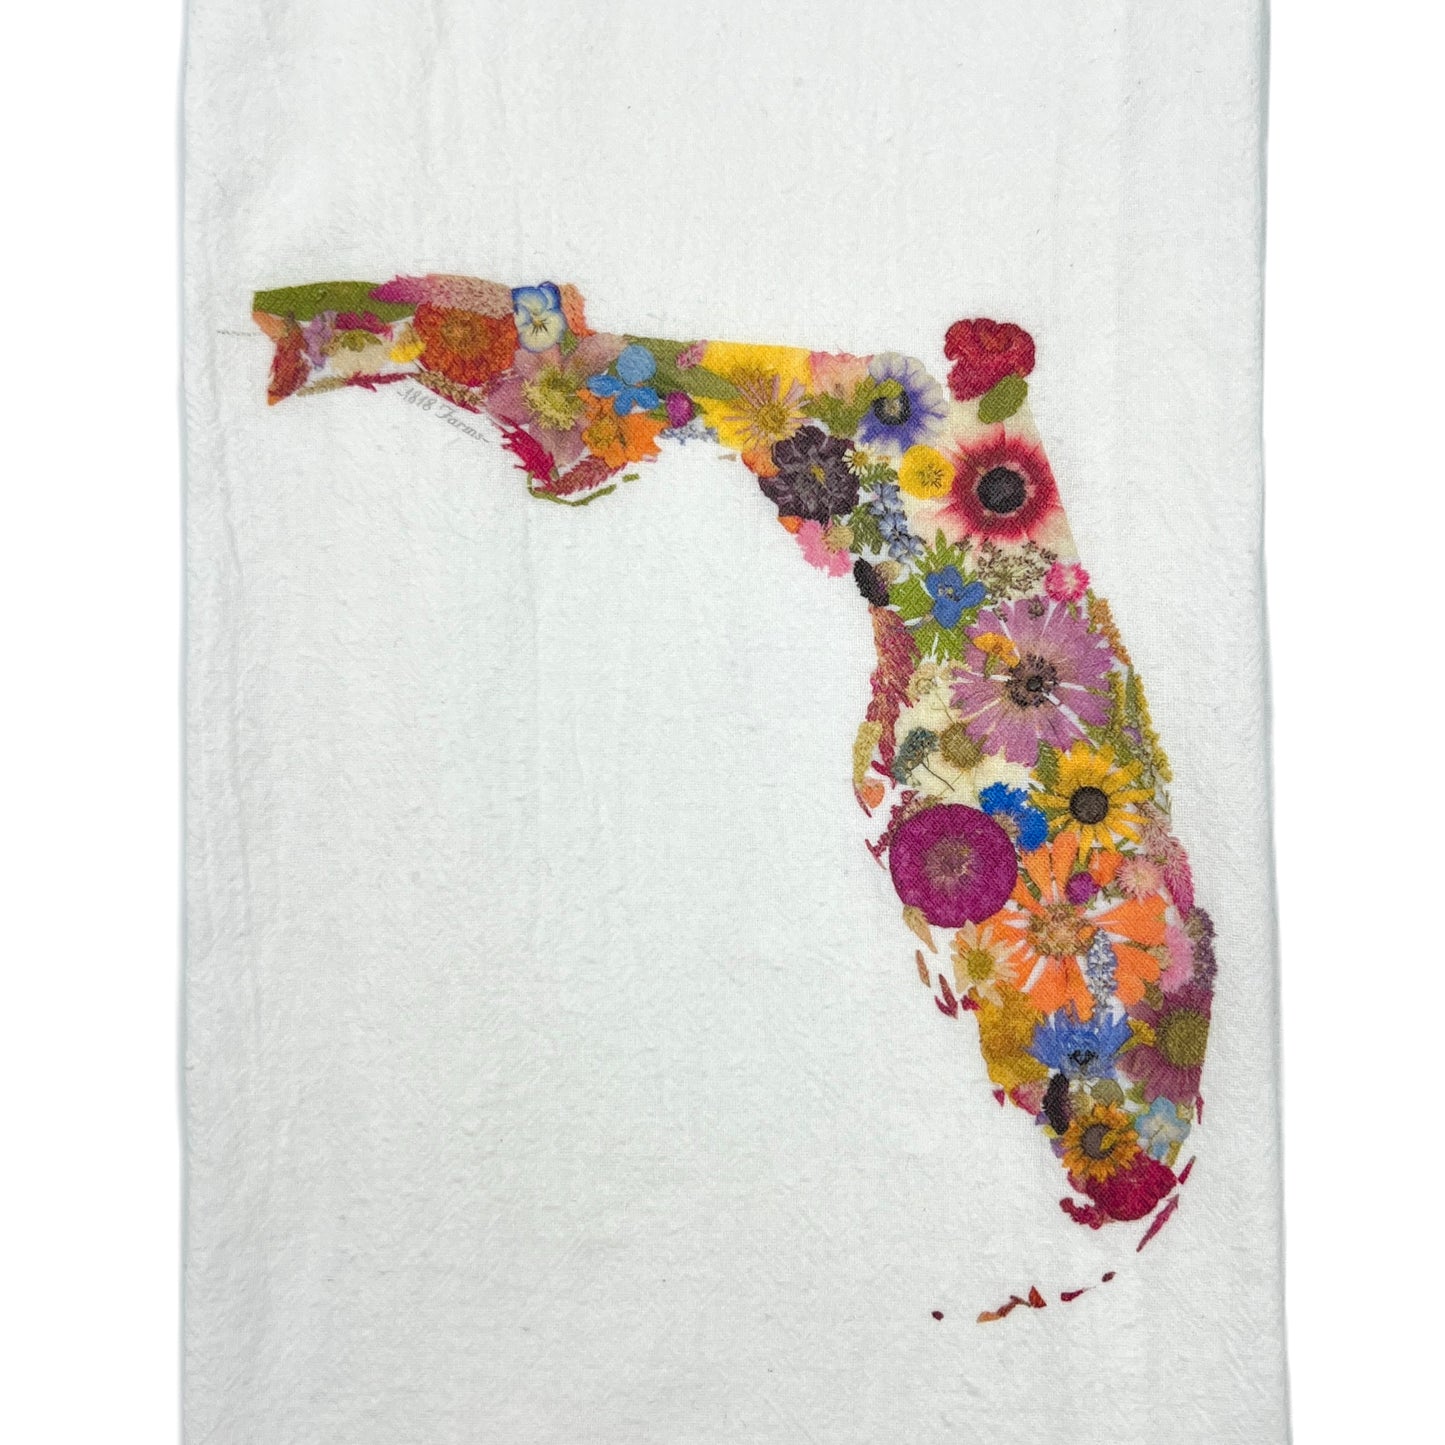 Florida Themed Flour Sack Towel Featuring Dried, Pressed Flowers - "Where I Bloom" Collection Towel 1818 Farms   